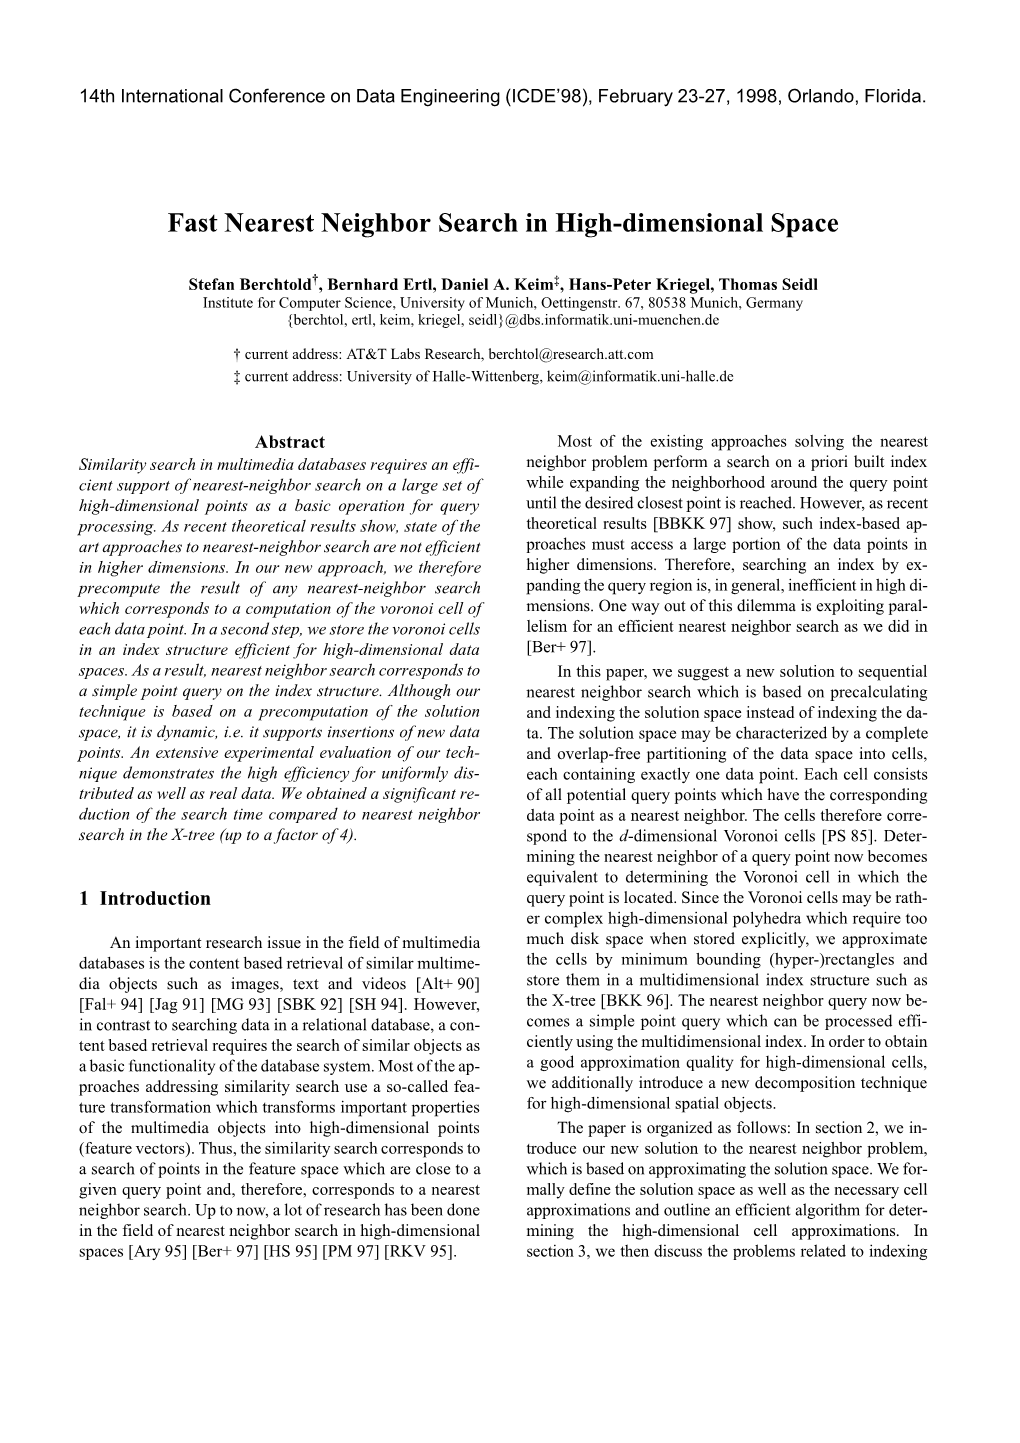 Fast Nearest Neighbor Search in High-Dimensional Space